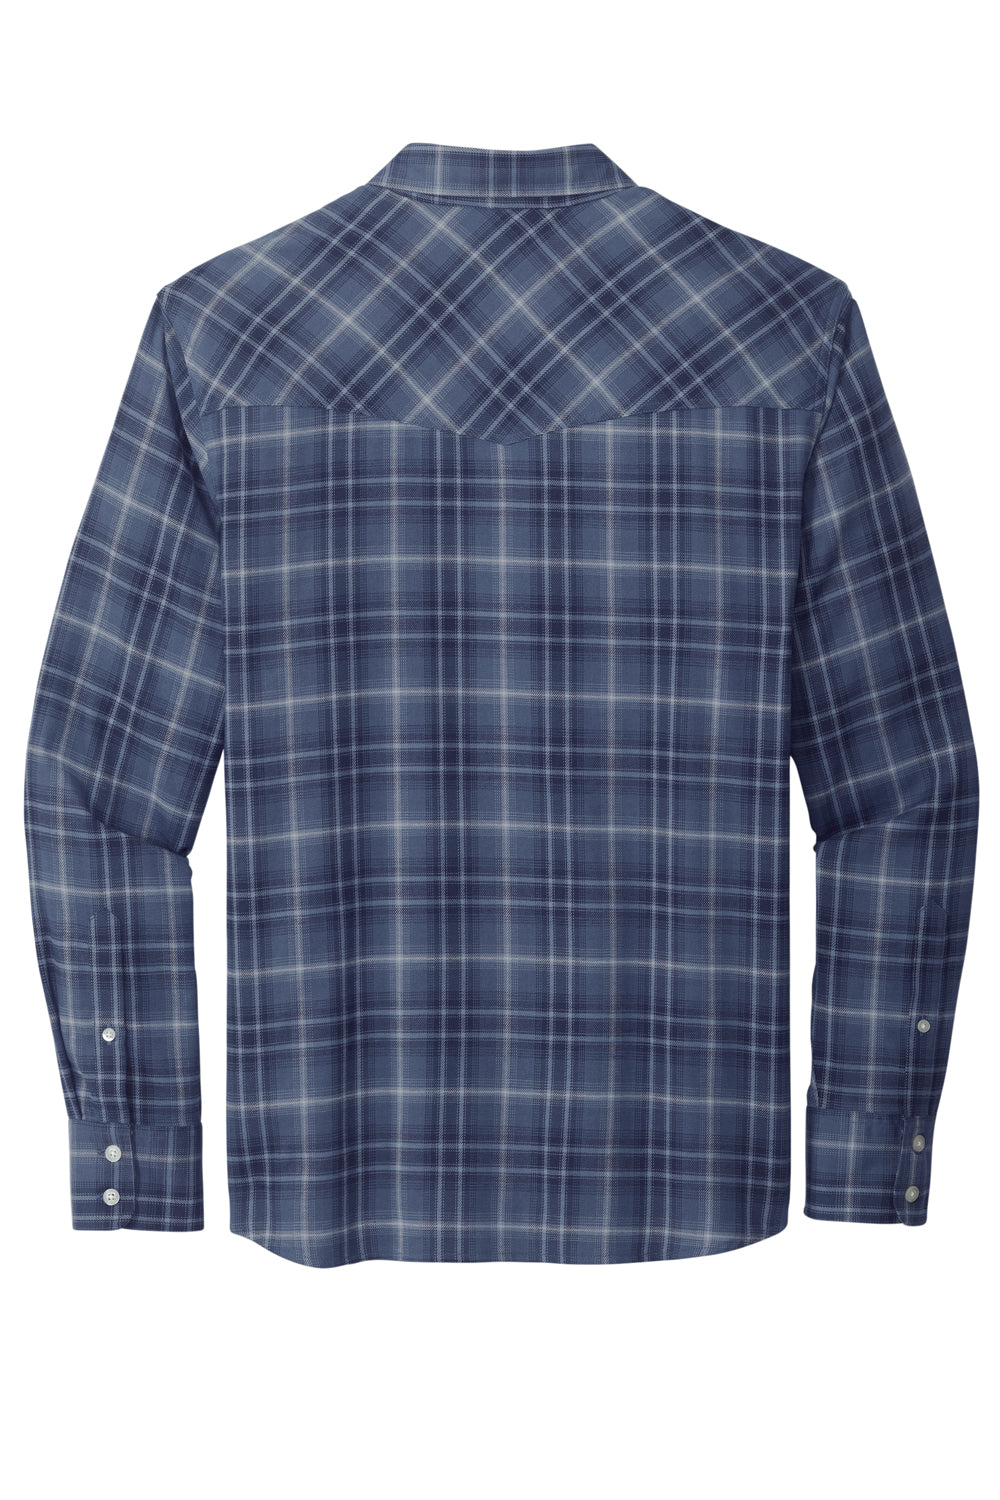 Port Authority W672 Ombre Plaid Long Sleeve Button Down Shirt True Navy Blue Flat Back